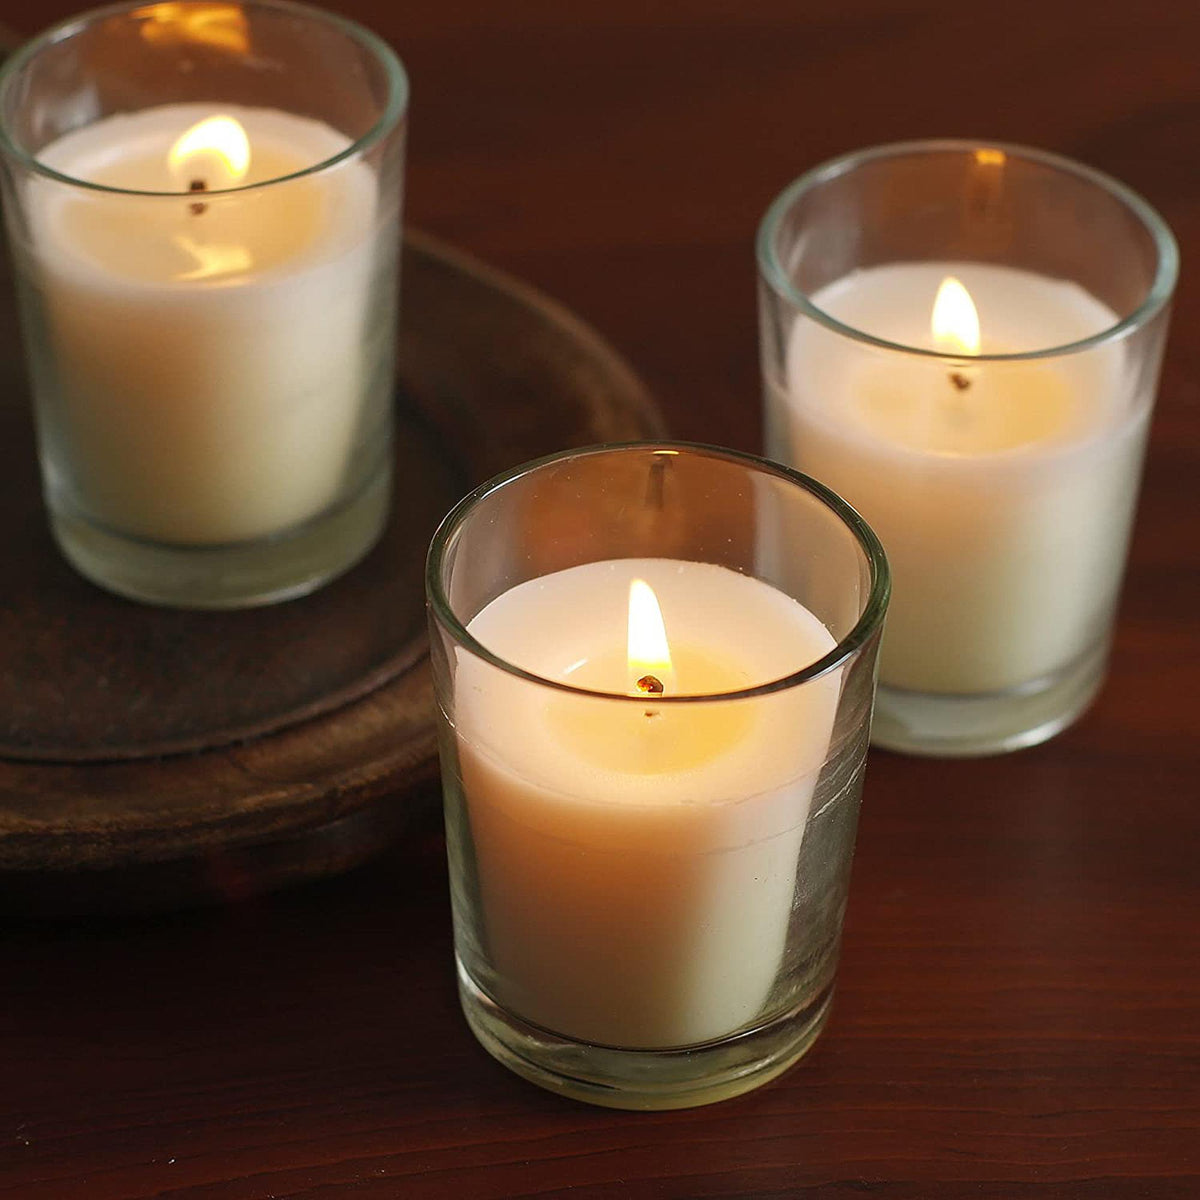 HOSLEY®  Clear Glass Filled Unscented Votive Candles, Ivory Color, 240 pack